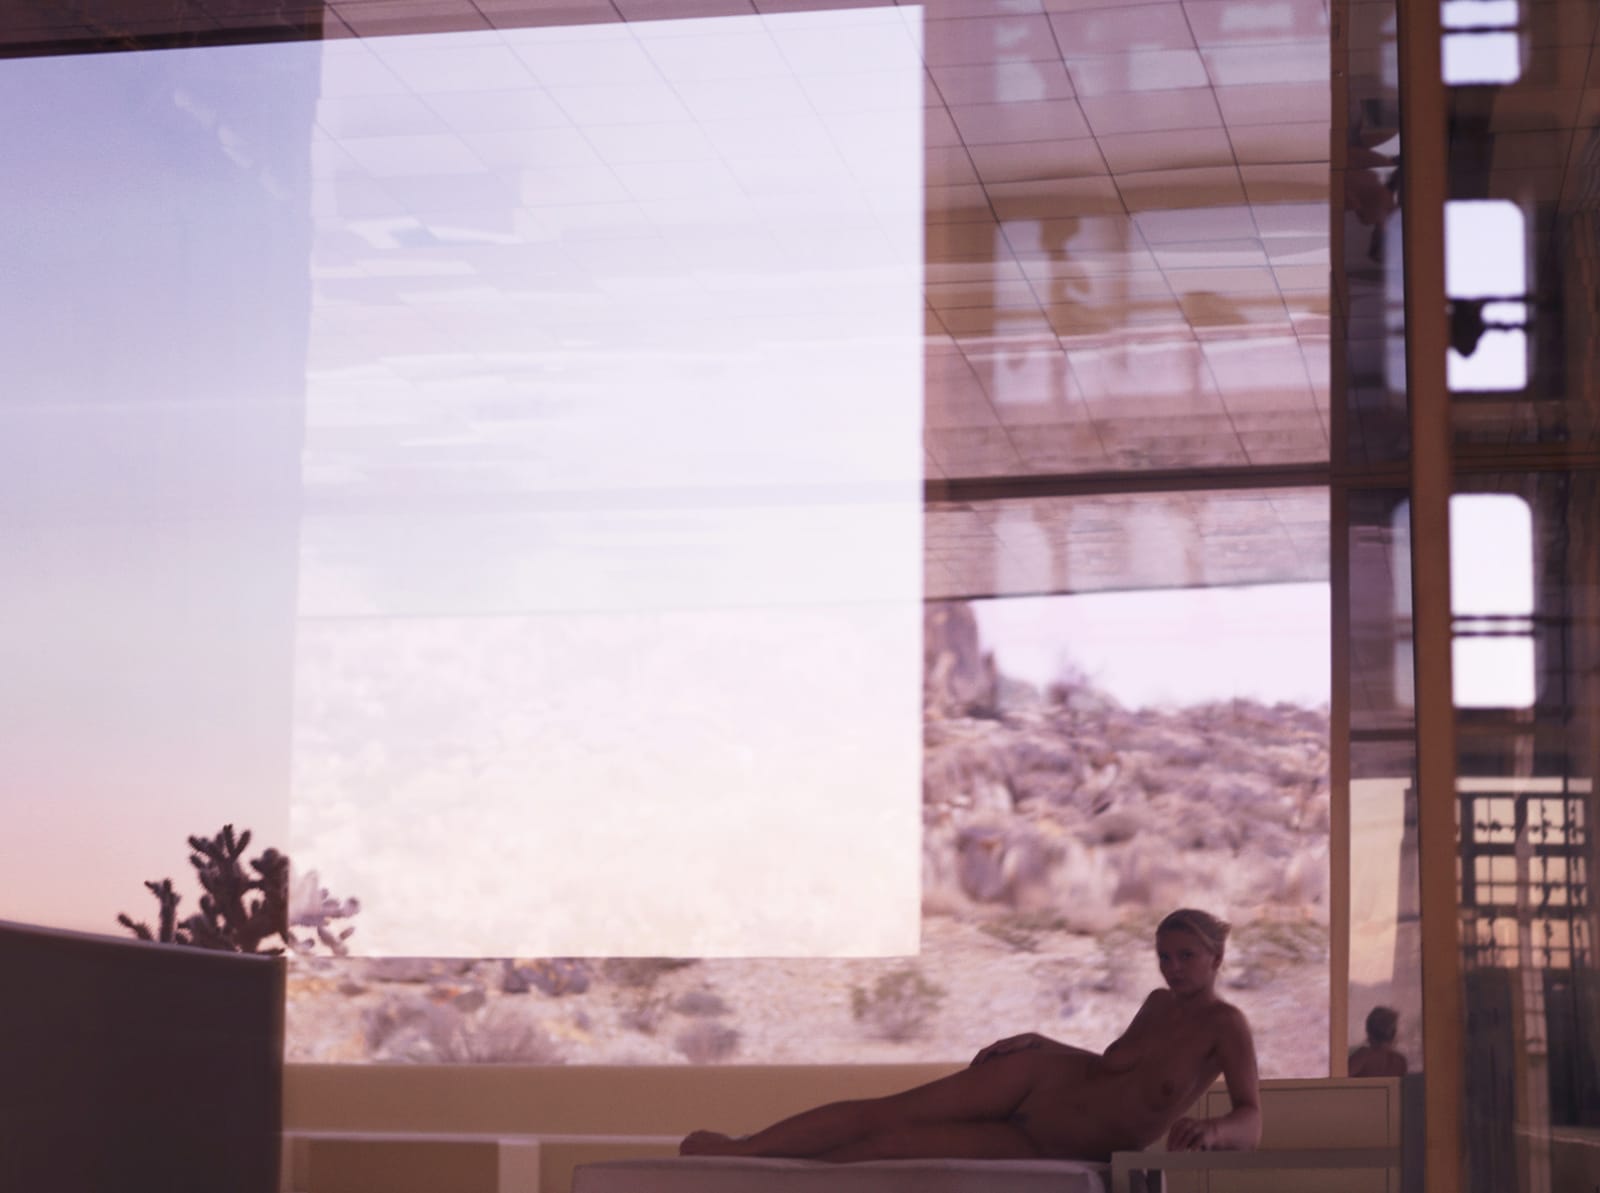 woman reclining in glass modernist house with reflections and California desert in rosy hue behind, by Mona Kuhn